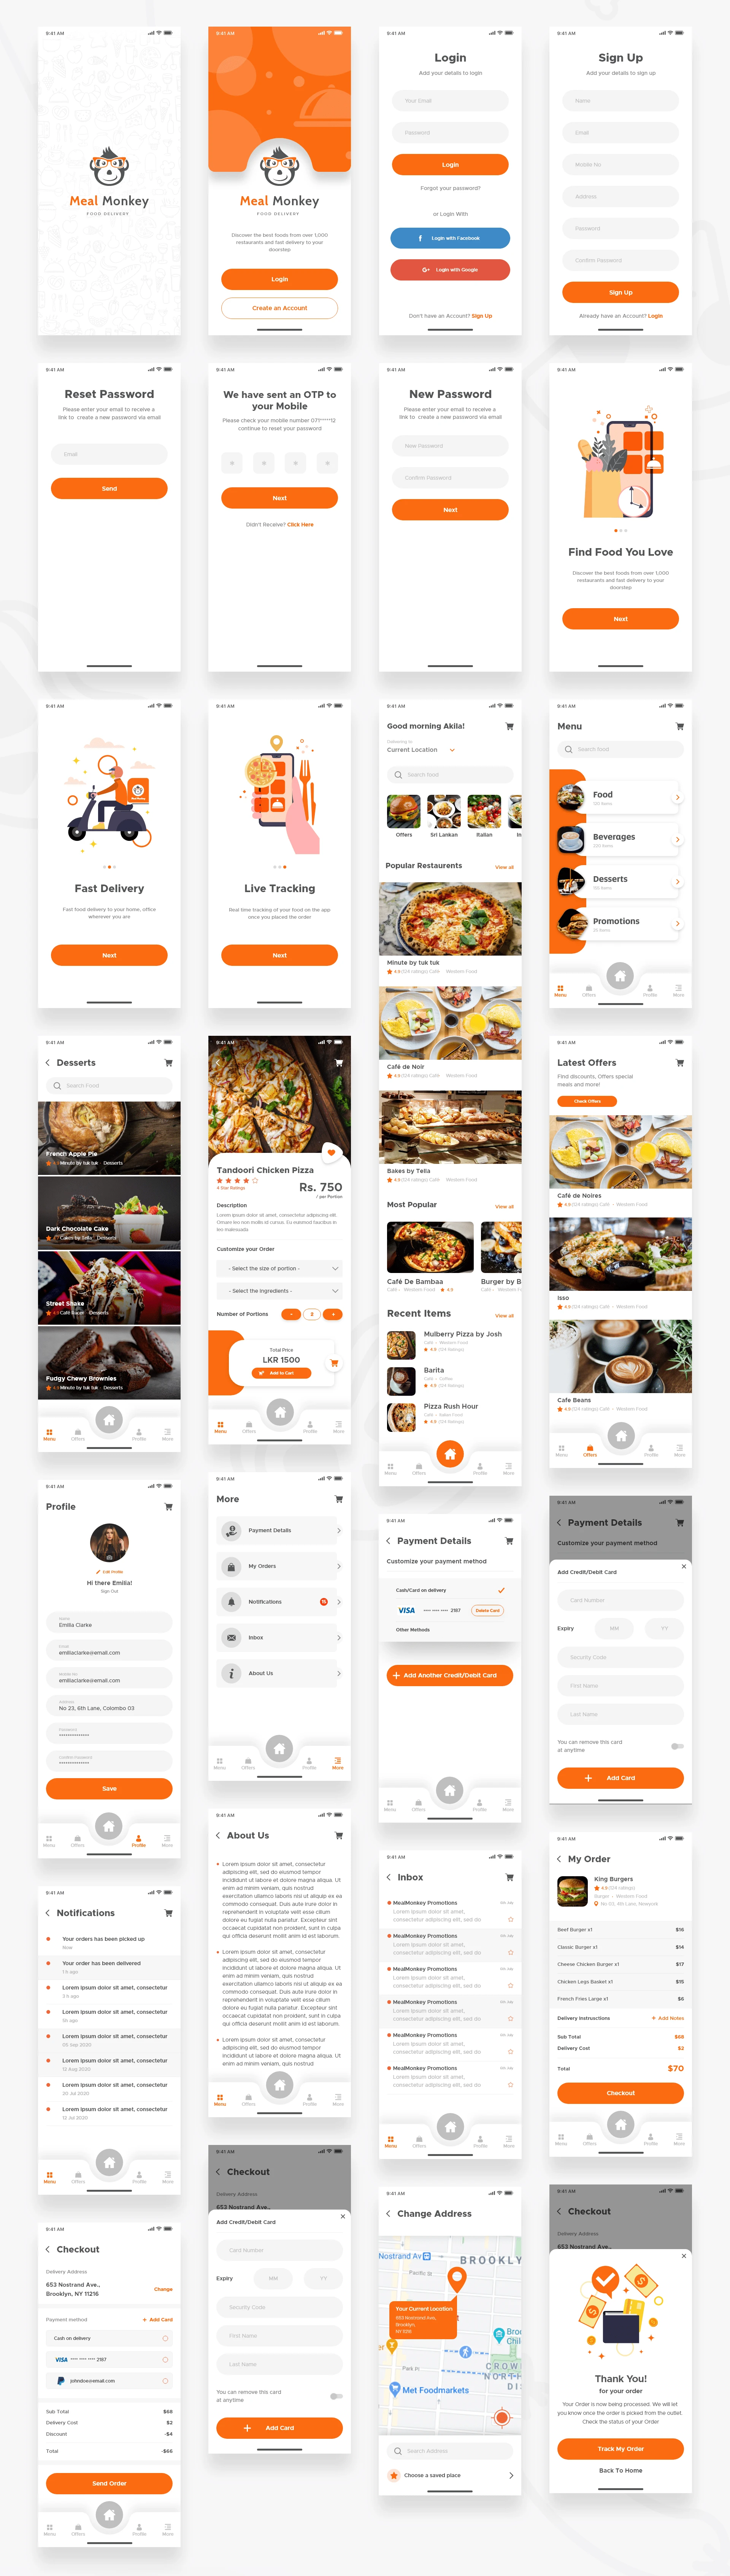 Food Delivery Free UI Kit for Adobe XD